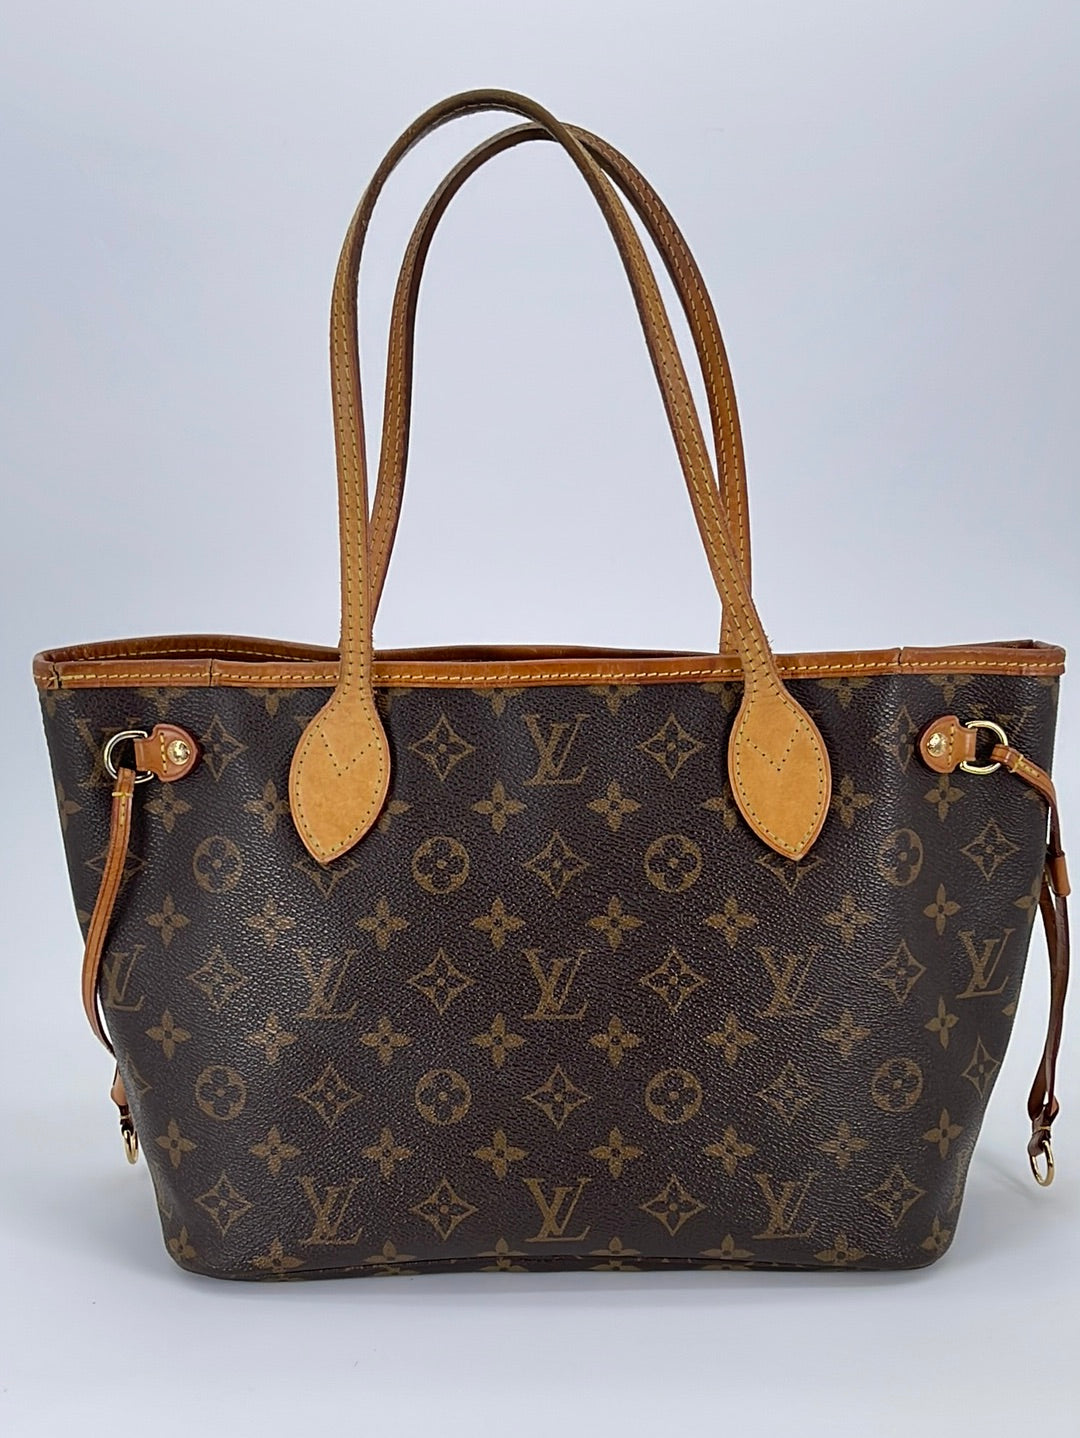 neverfull pm louis vuitton price